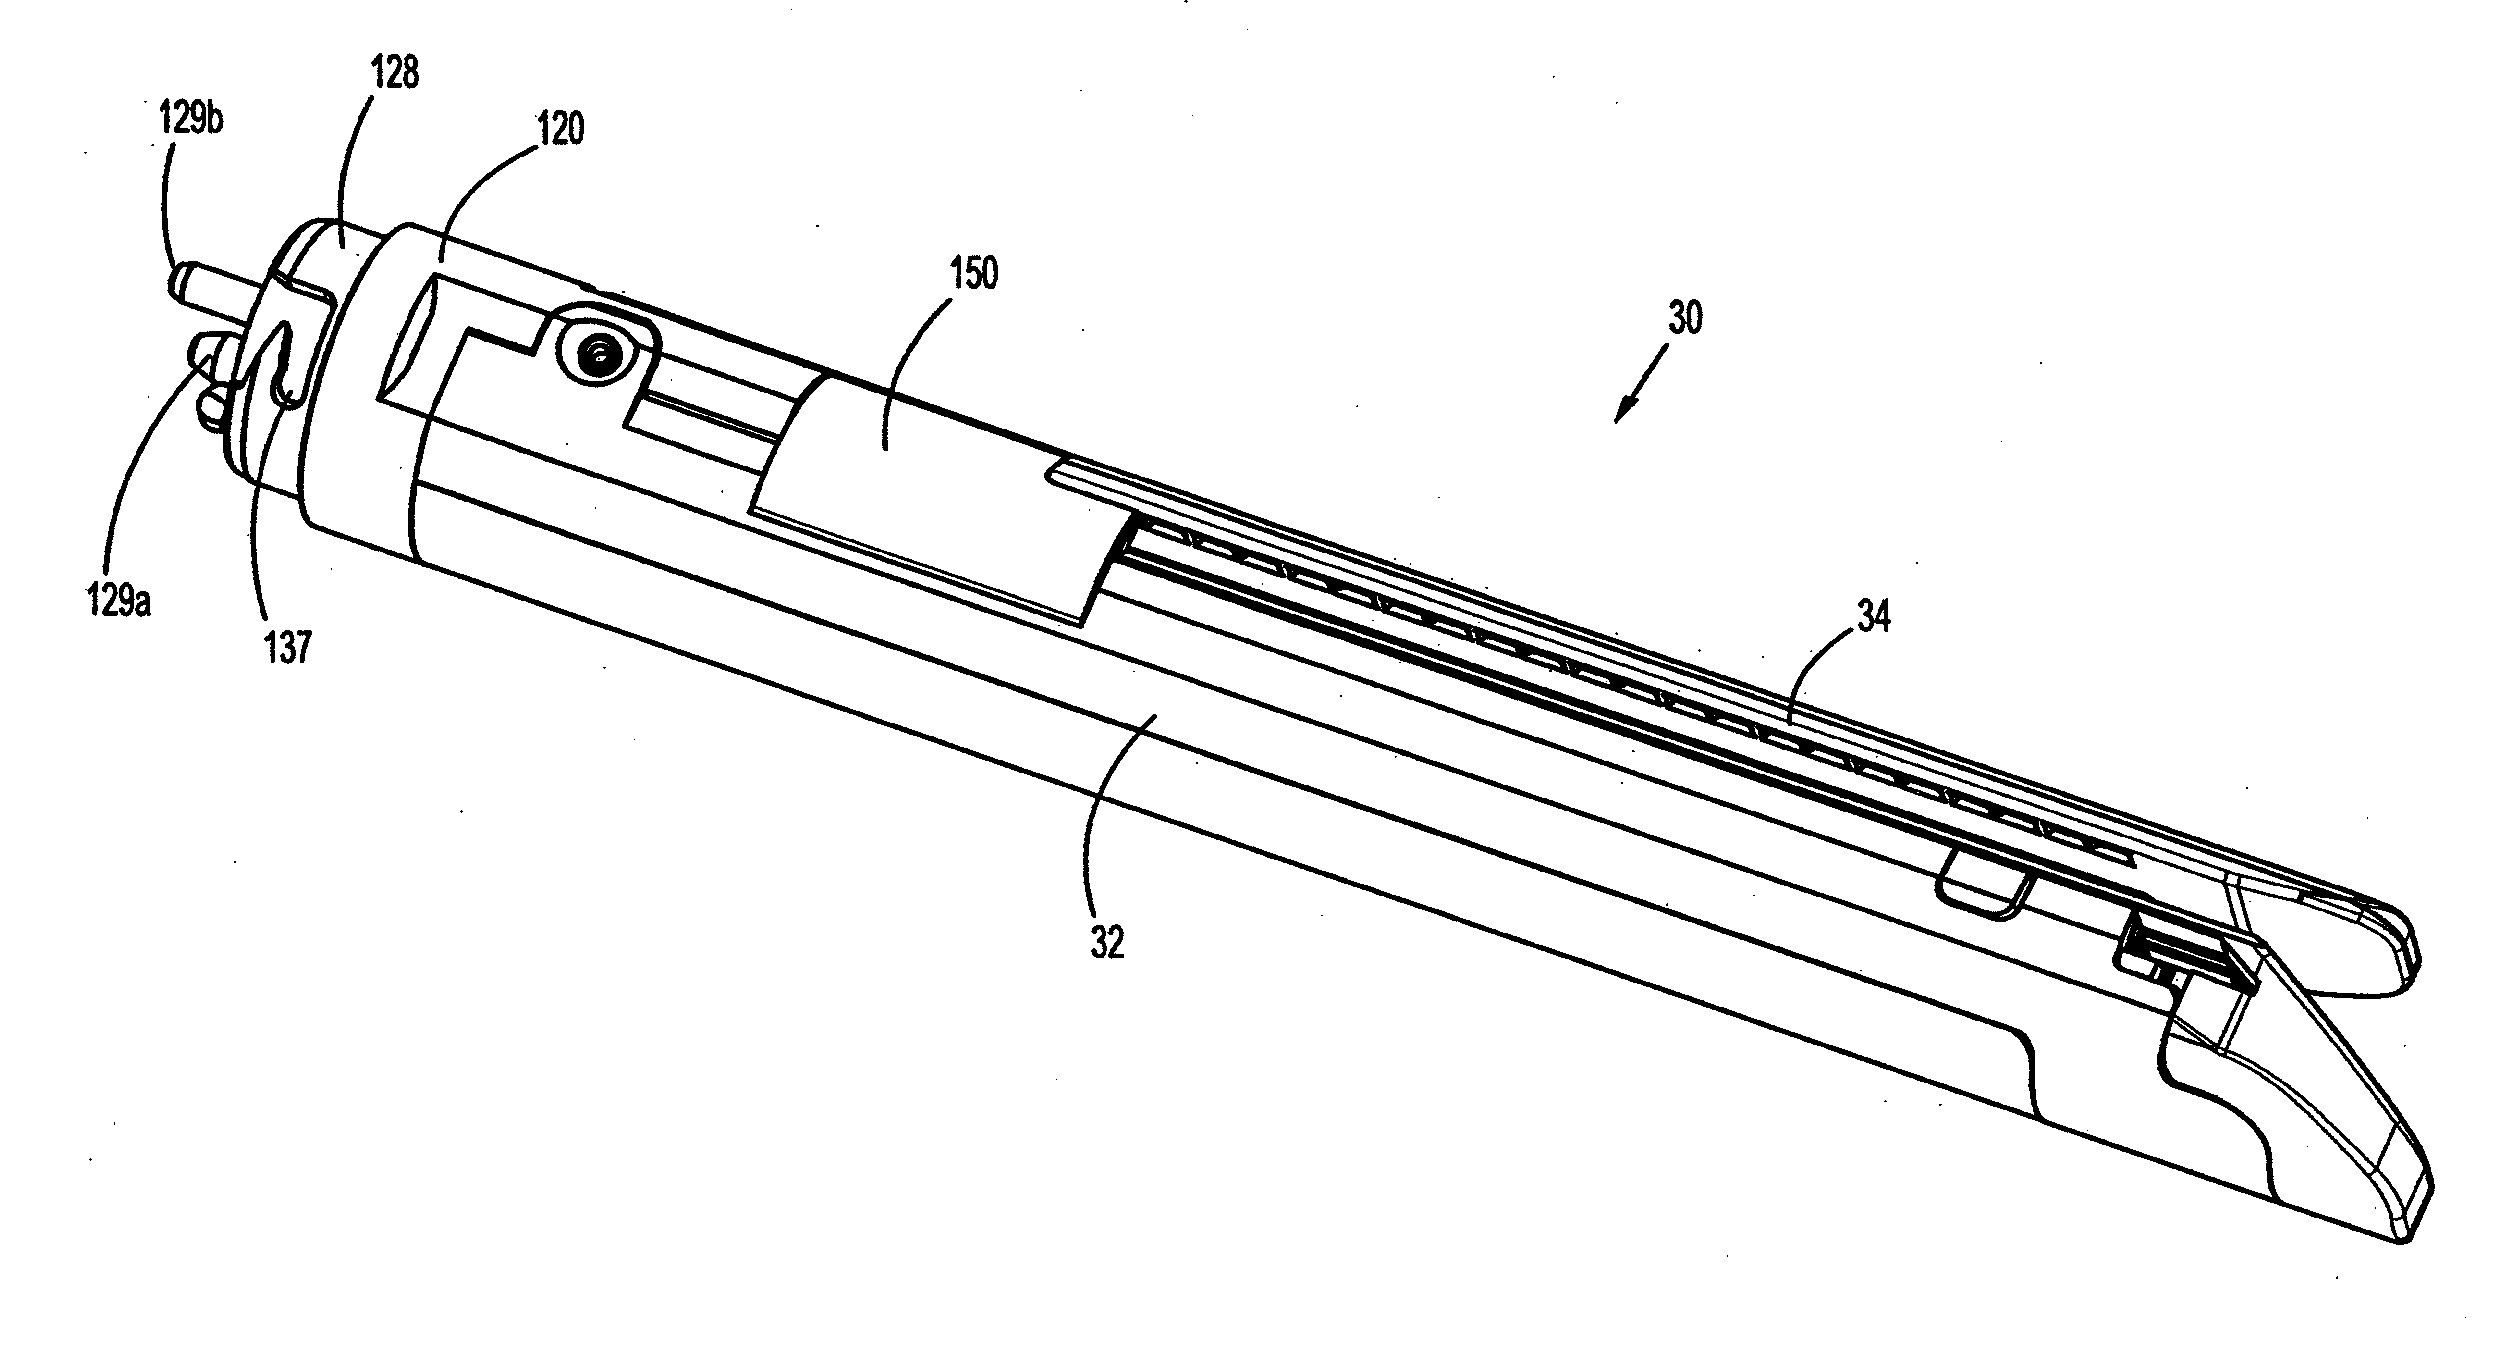 Surgical Apparatus and Method for Endoscopic Surgery